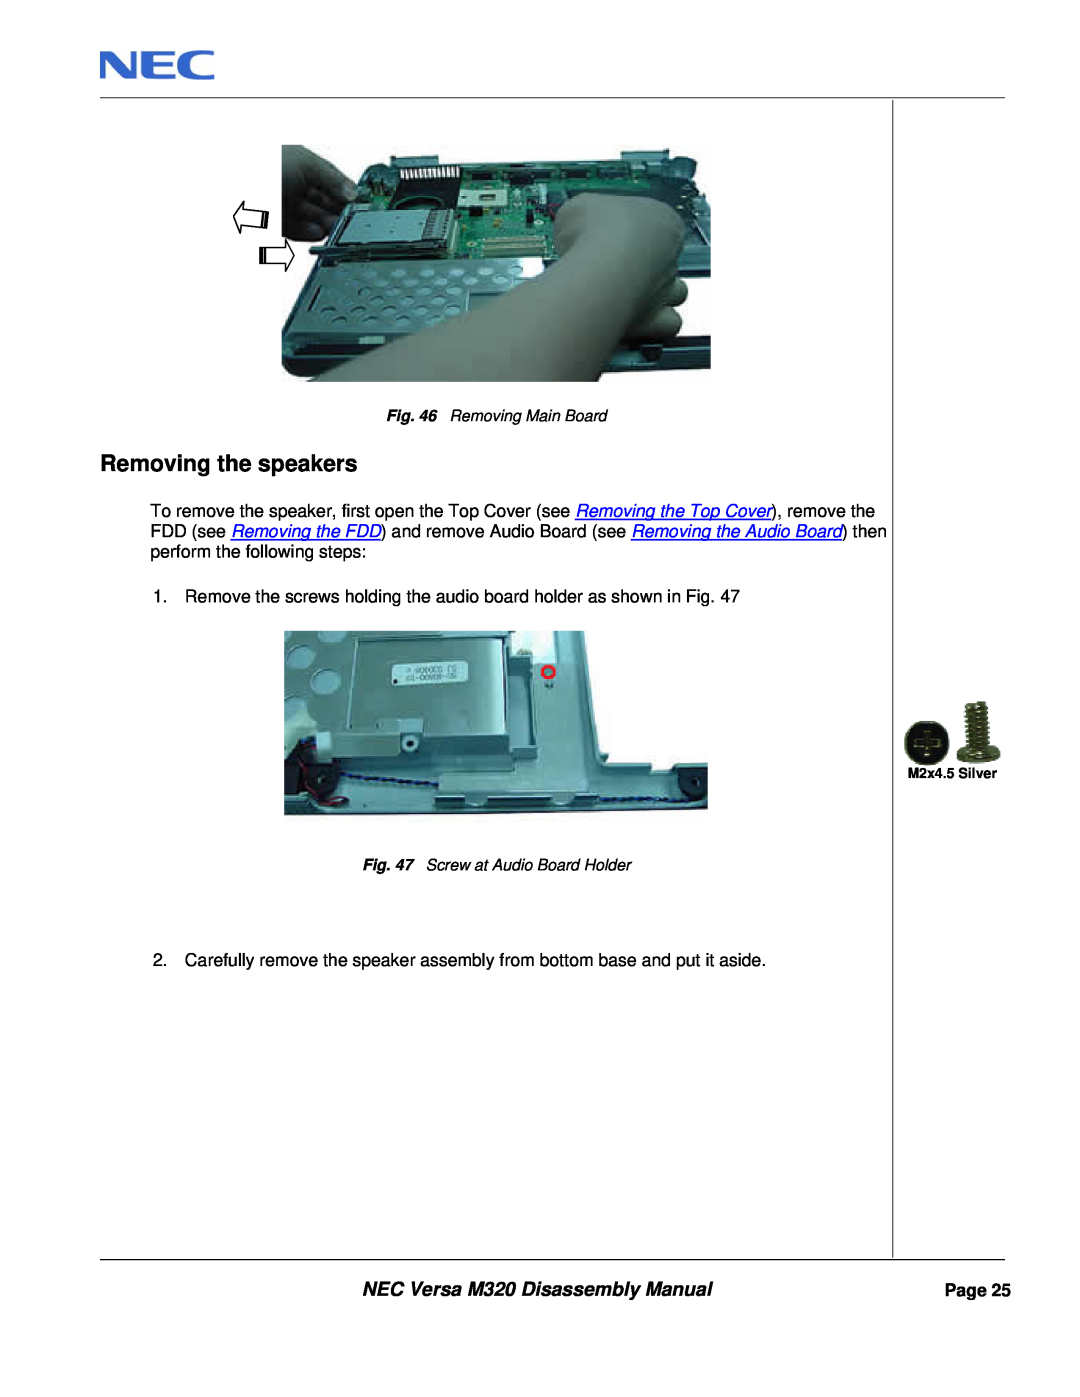 NEC manual Removing the speakers, NEC Versa M320 Disassembly Manual, Removing Main Board, Screw at Audio Board Holder 